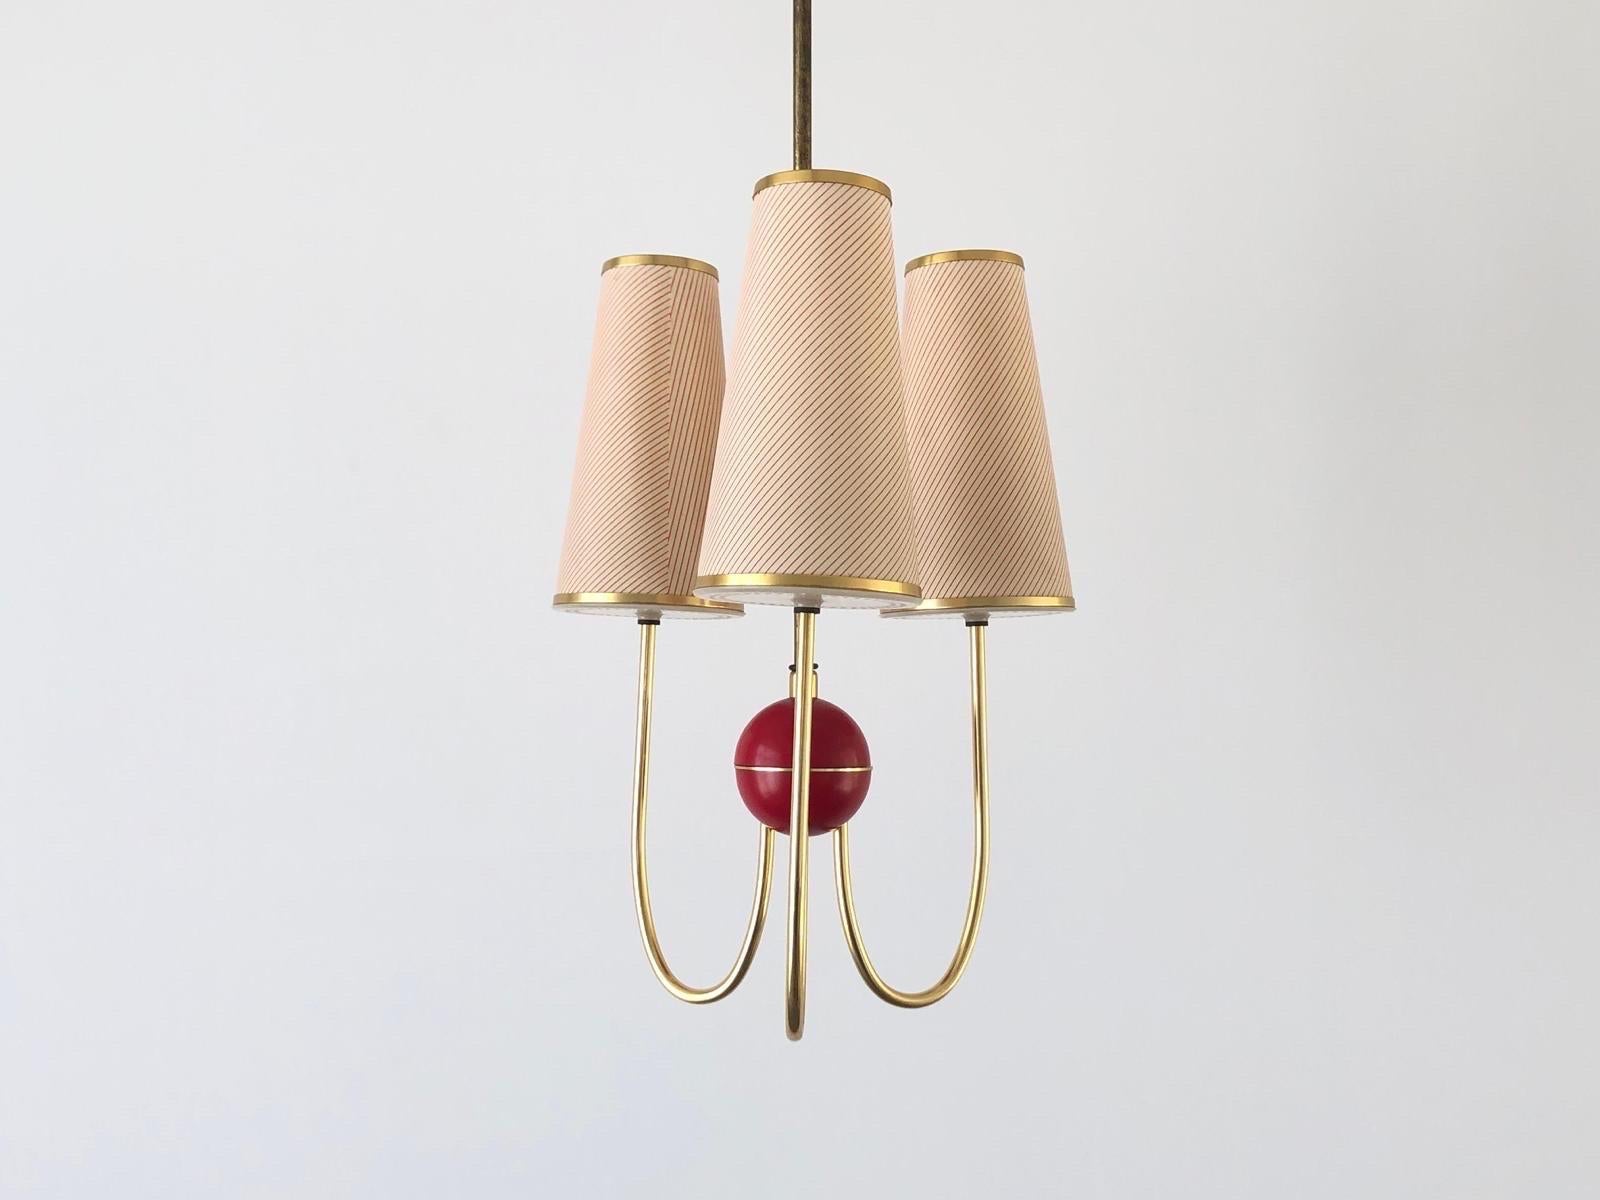 3-armed Fabric and Plastic Sputnik Pendant Lamp by Erco, 1950s, Germany For Sale 4